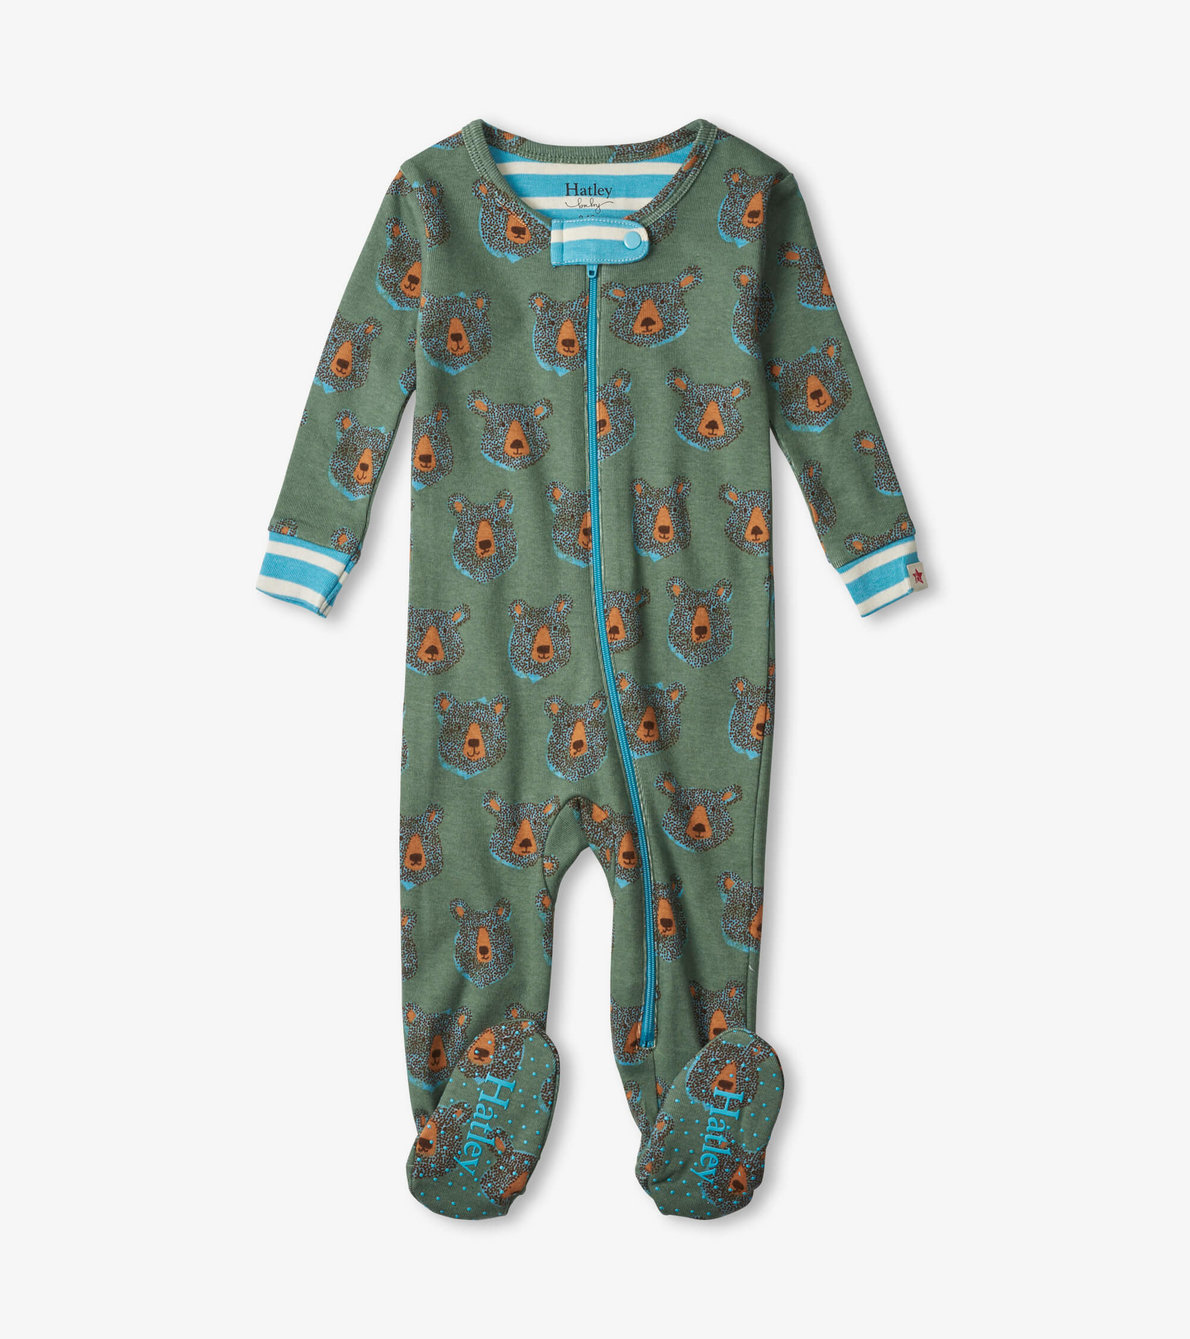 View larger image of Blue Bears Organic Cotton Footed Coverall